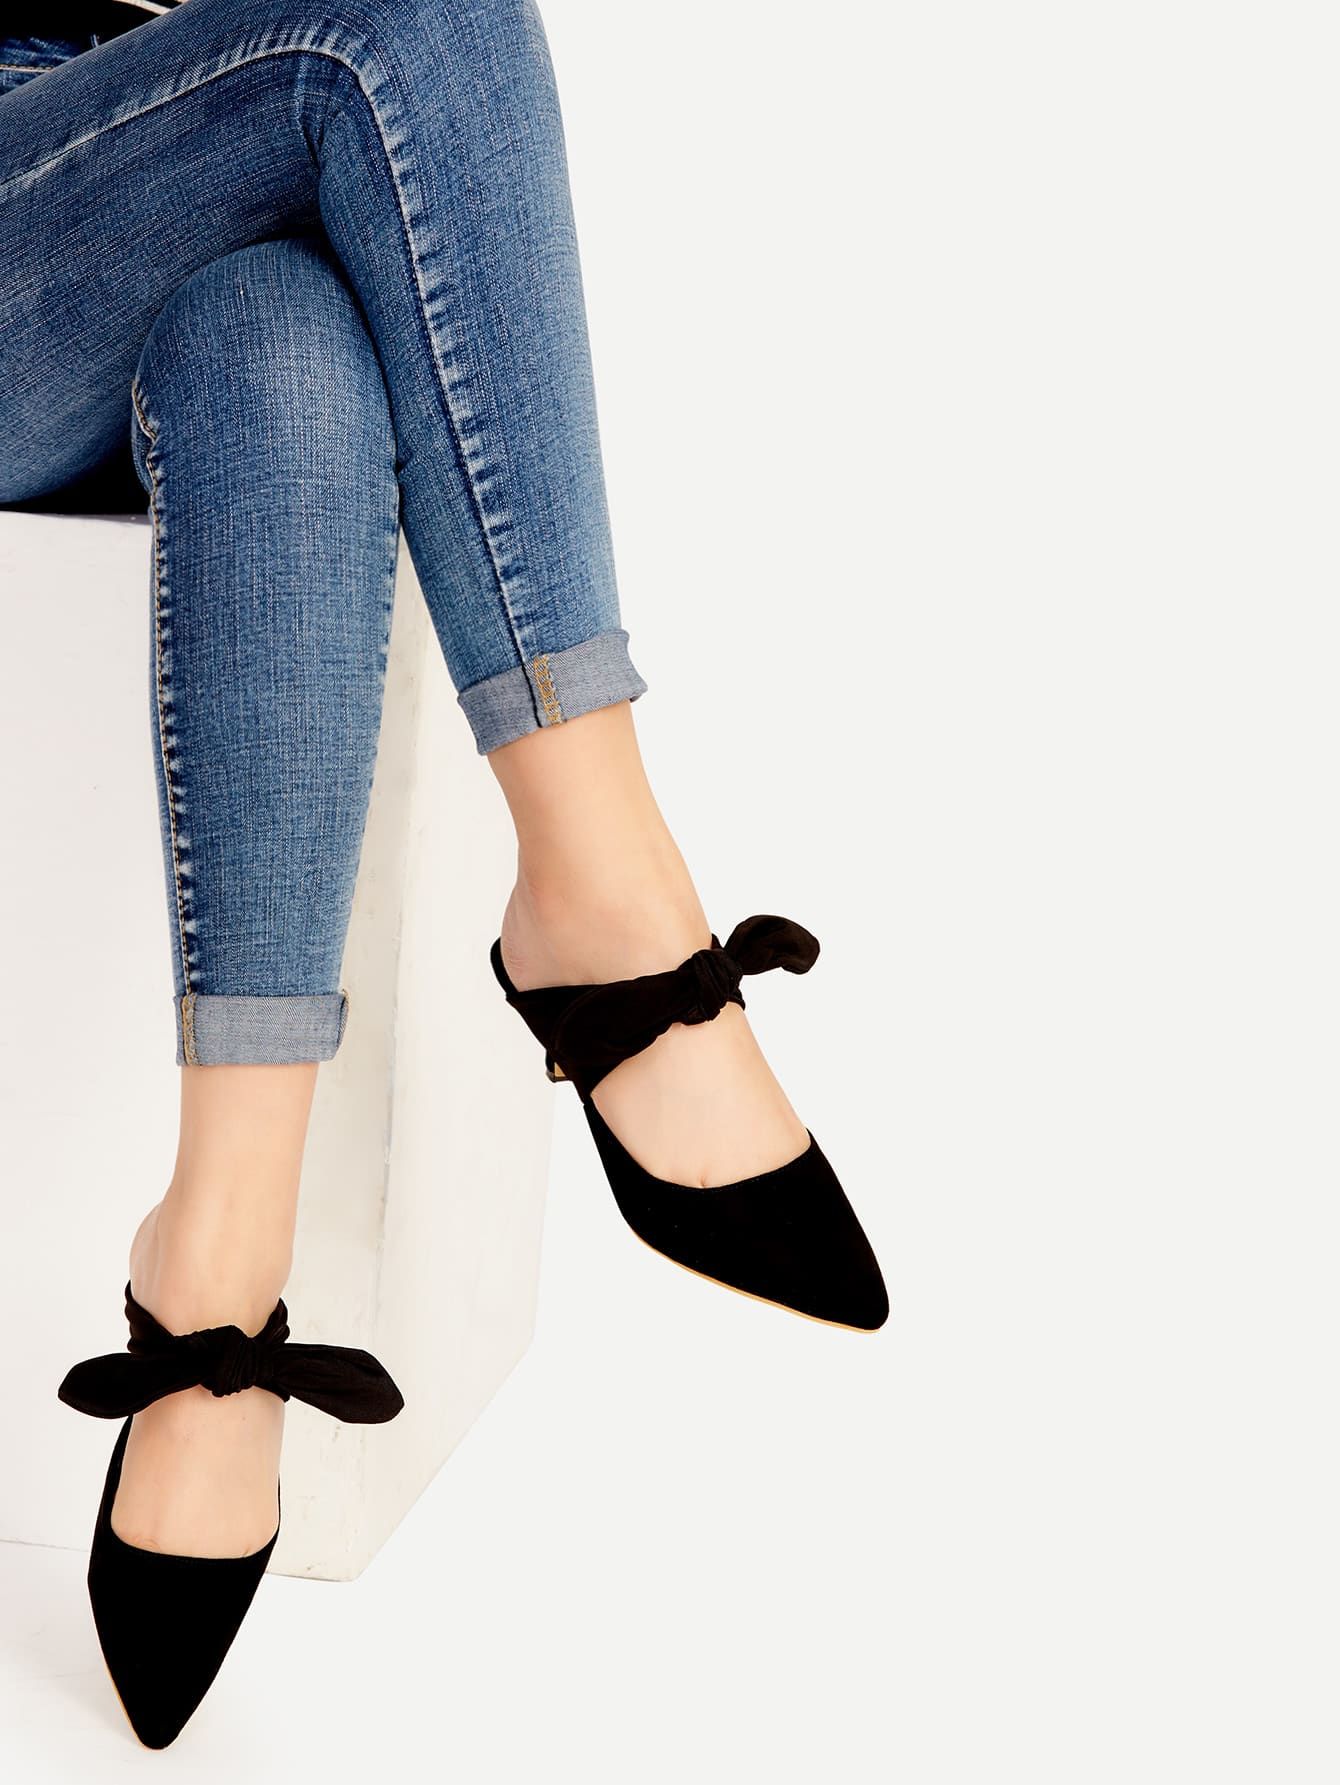 Black Point Toe Bow Tie Heeled Mules | SHEIN